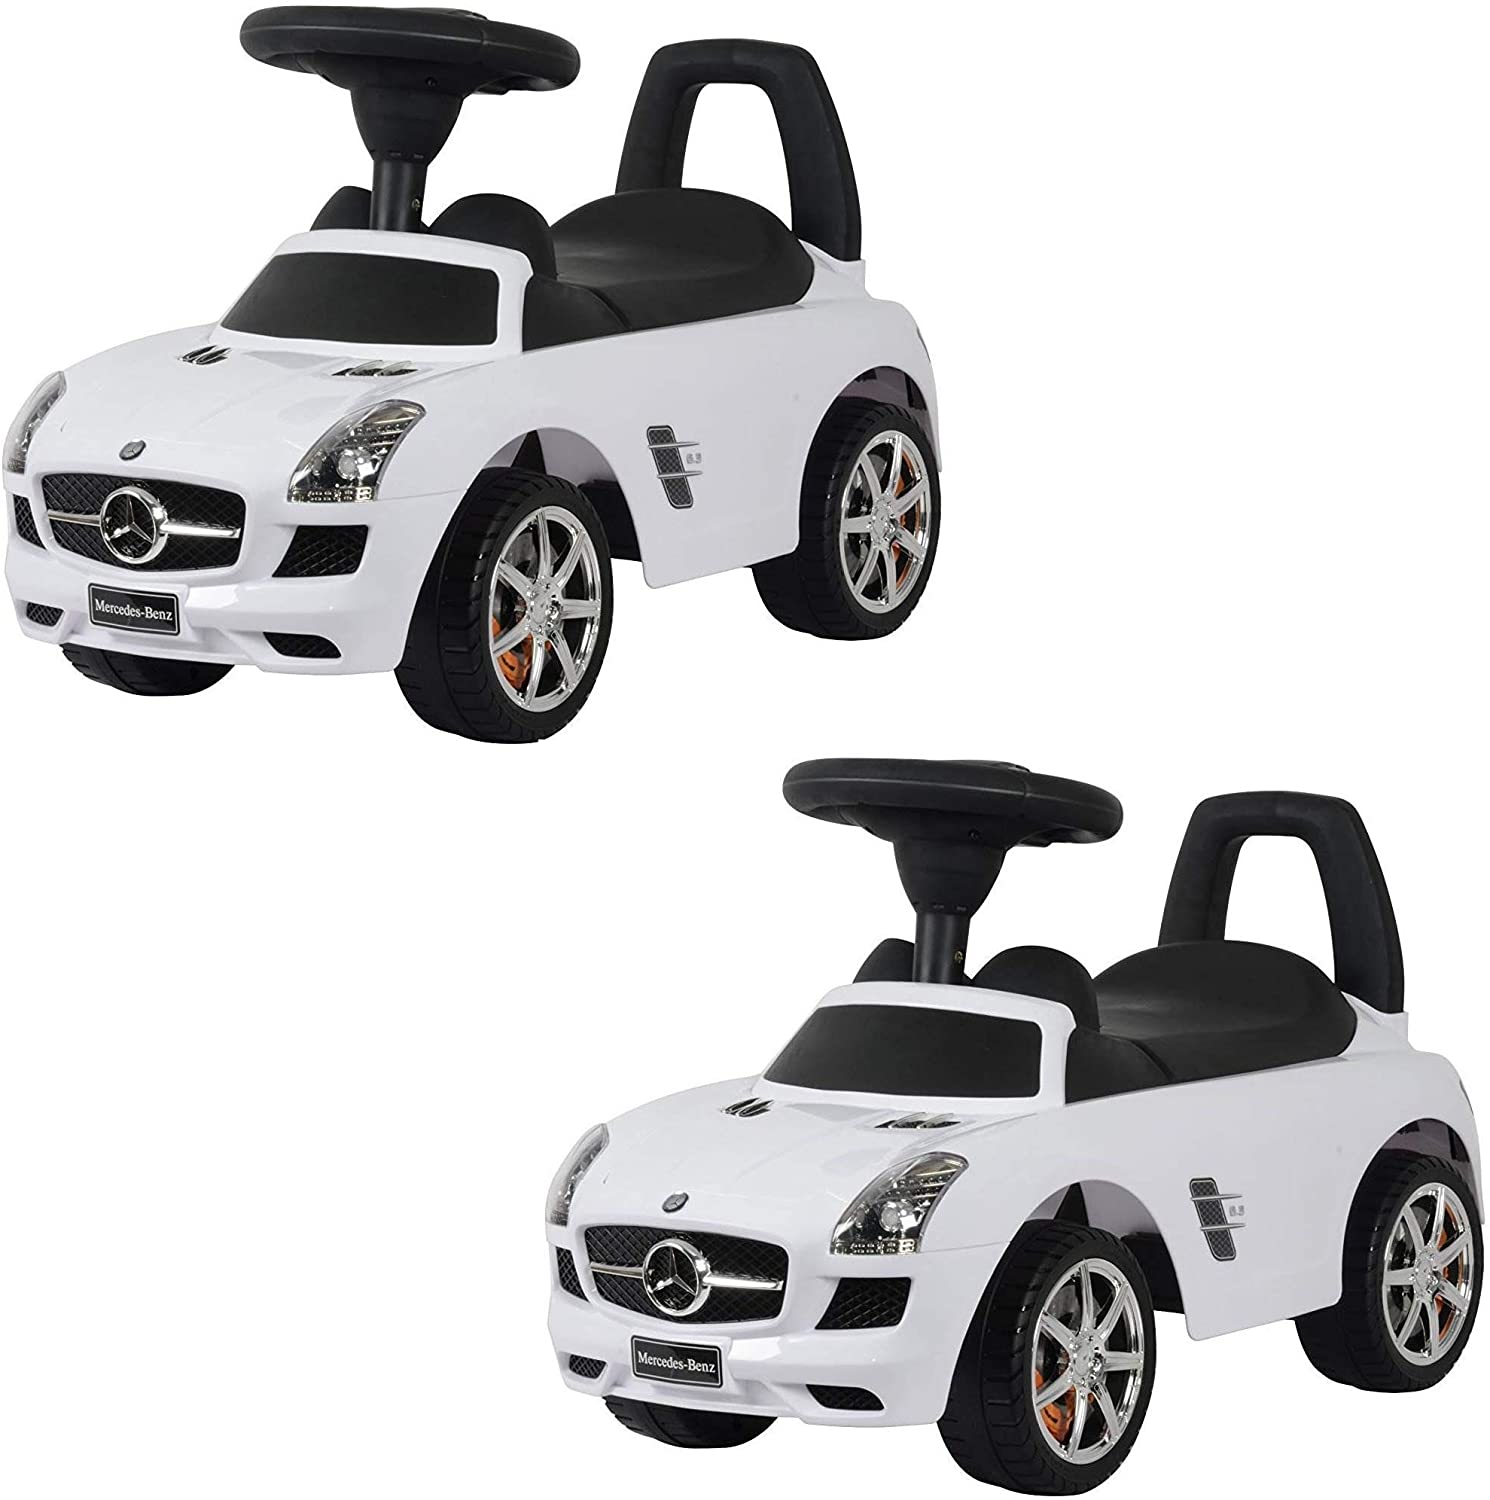 Best Ride On Cars Baby Toddler Ride-On Mercedes Benz Push Car w/ Sounds (2 Pack)